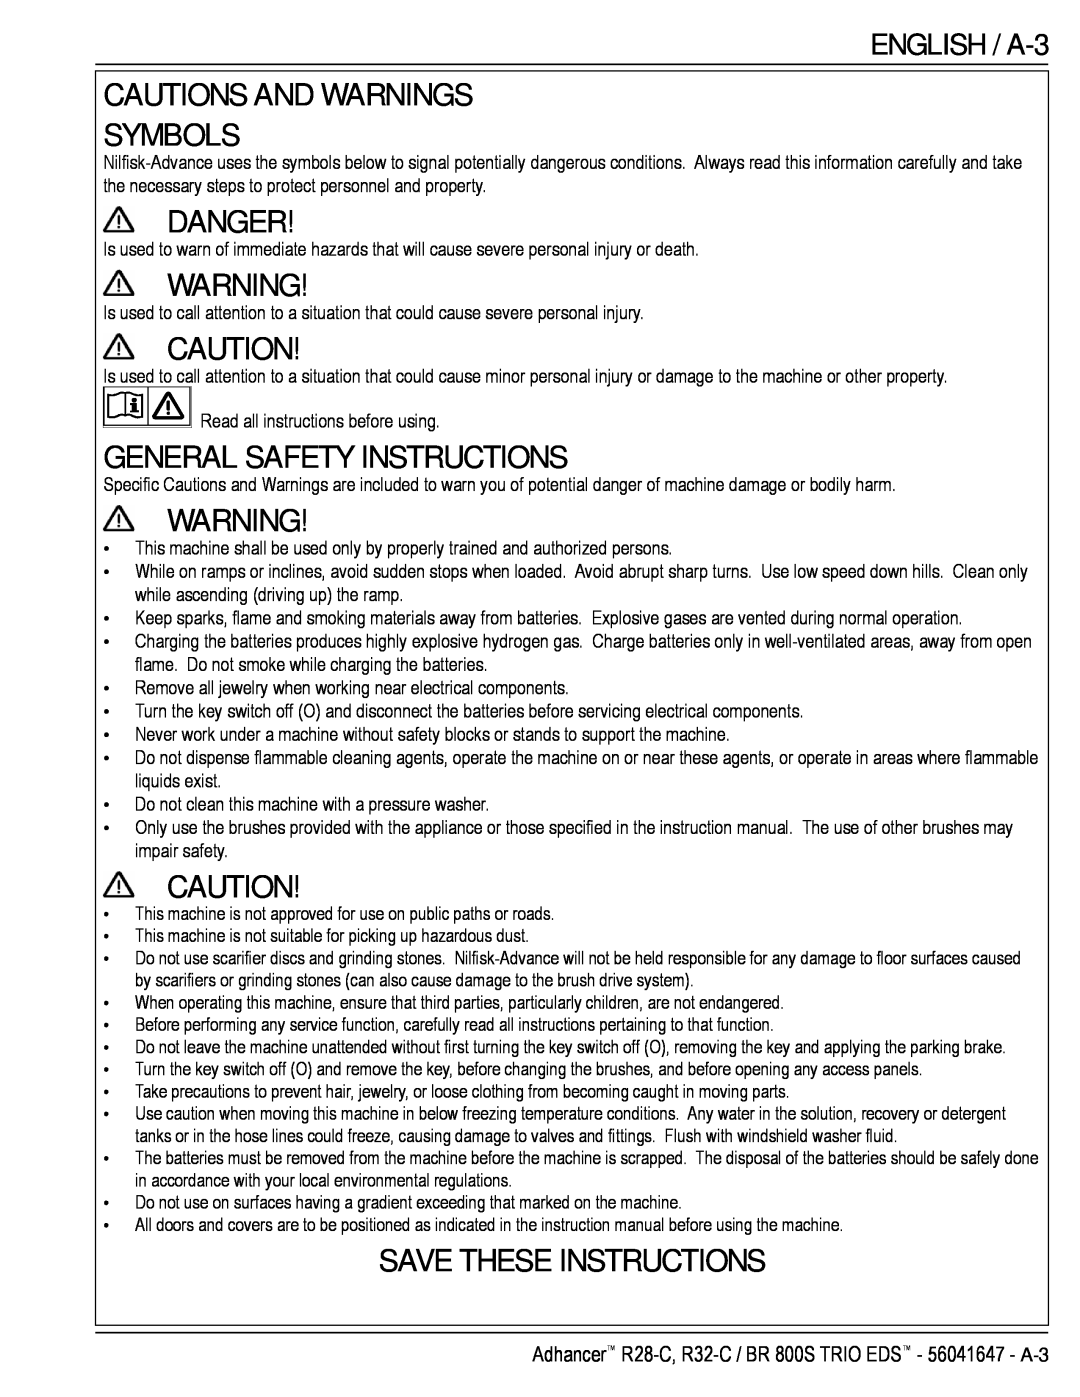 Nilfisk-Advance America 56316025 (R32-C) Cautions And Warnings Symbols, Danger, General Safety Instructions, ENGLISH / A-3 